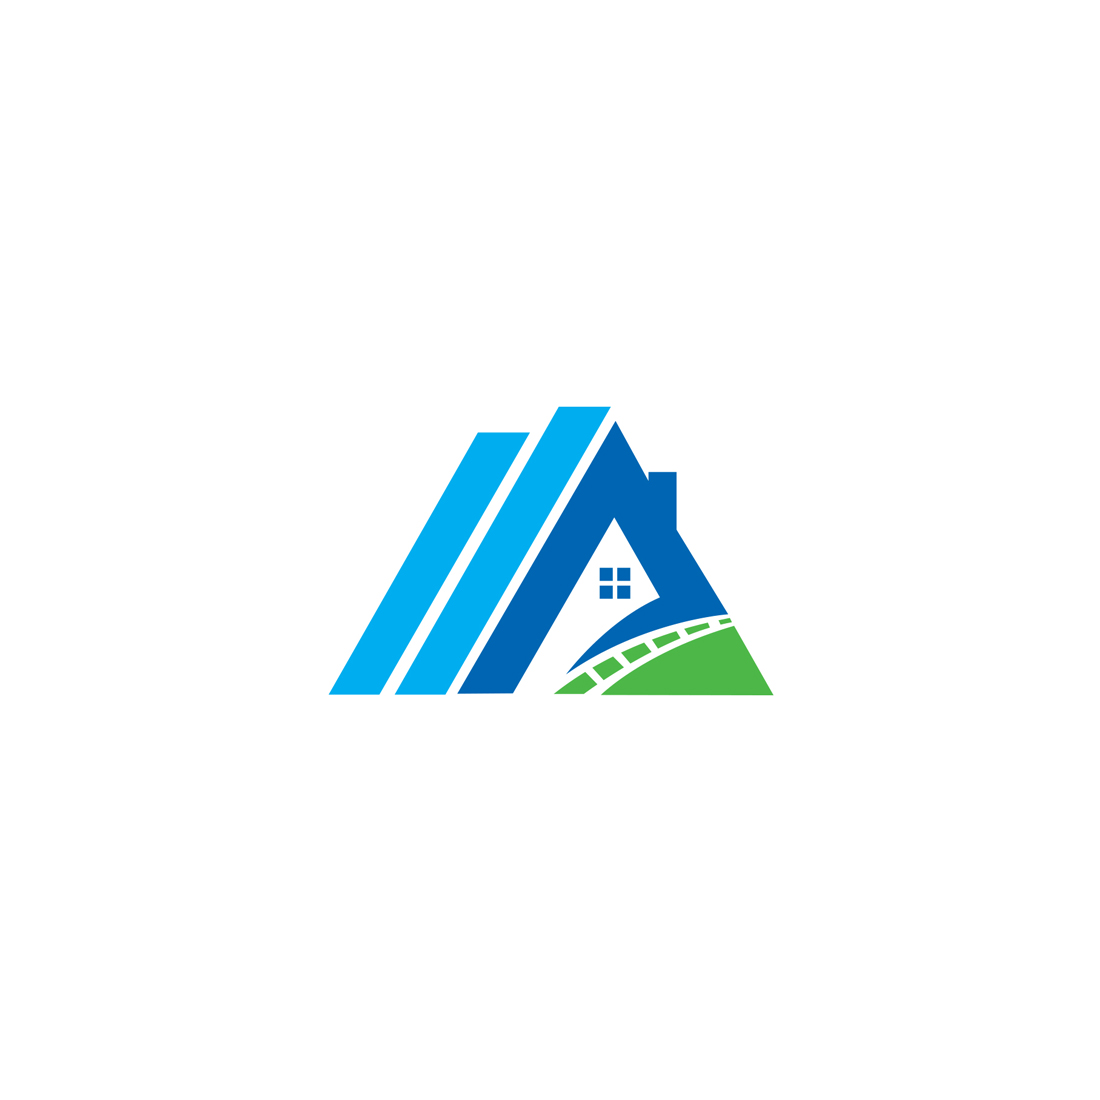 Blue and green logo with a house in the middle.